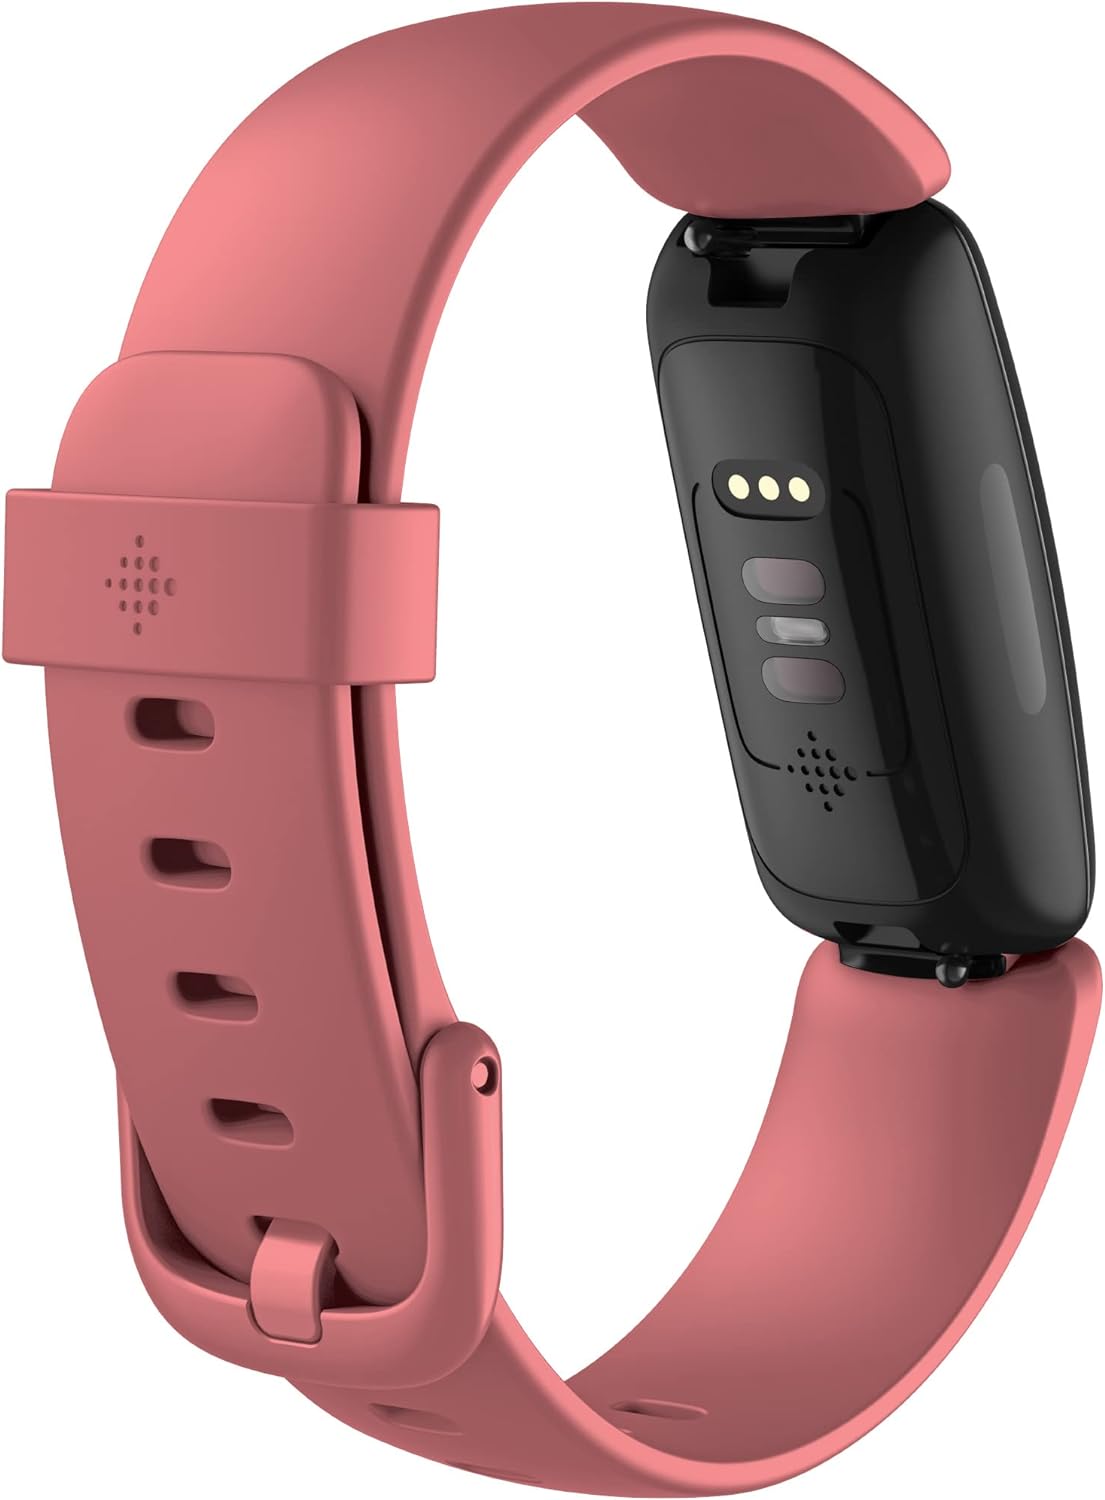 Fitbit Inspire 2 Health & Fitness Tracker - Red - $50